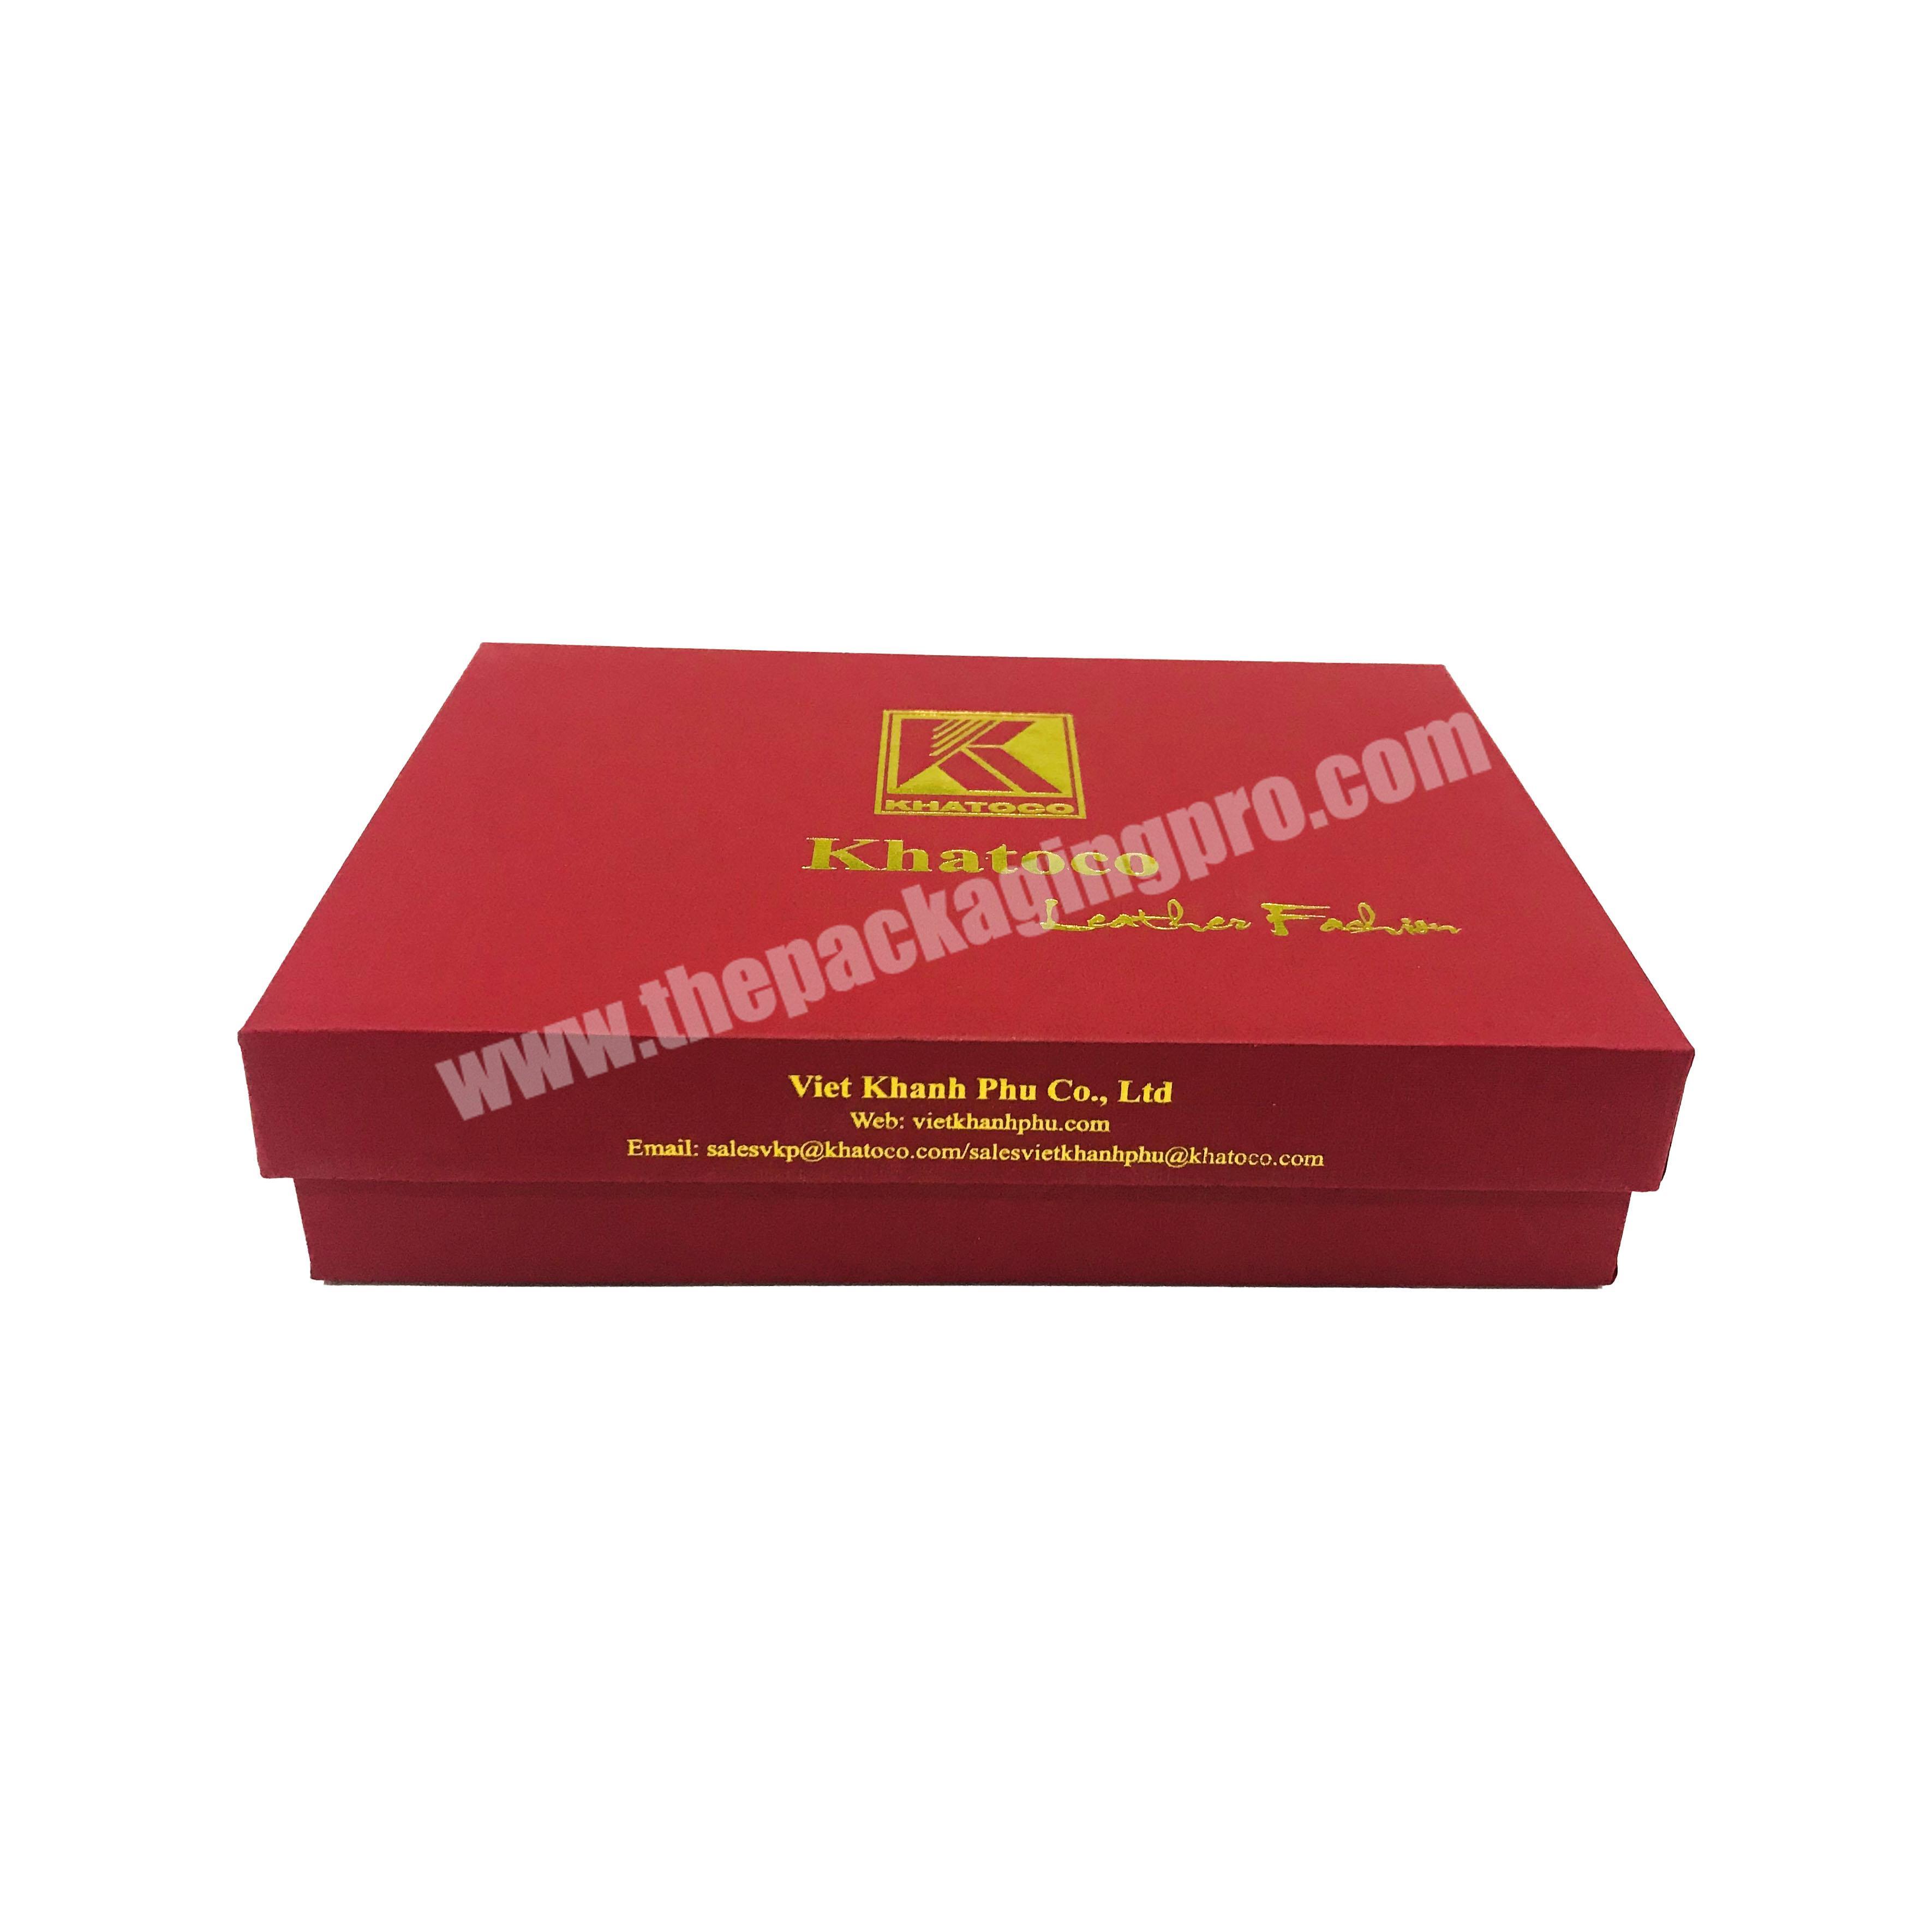 High Quality Red Boxes Cardboard With Lid And Logo